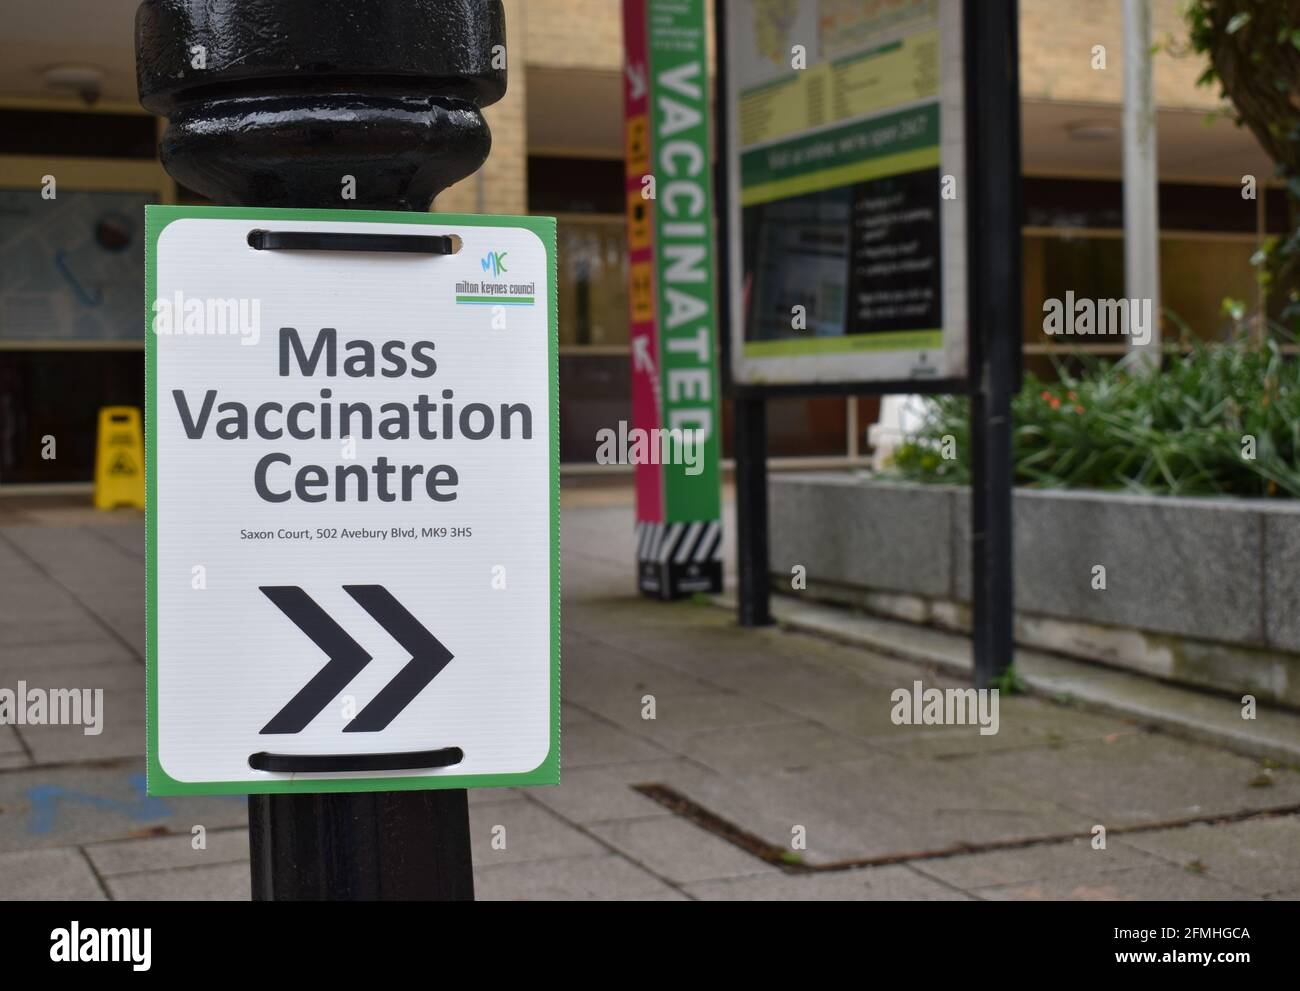 Sign pointing to a COVID-19 Mass Vaccination Centre in Milton Keynes. Stock Photo